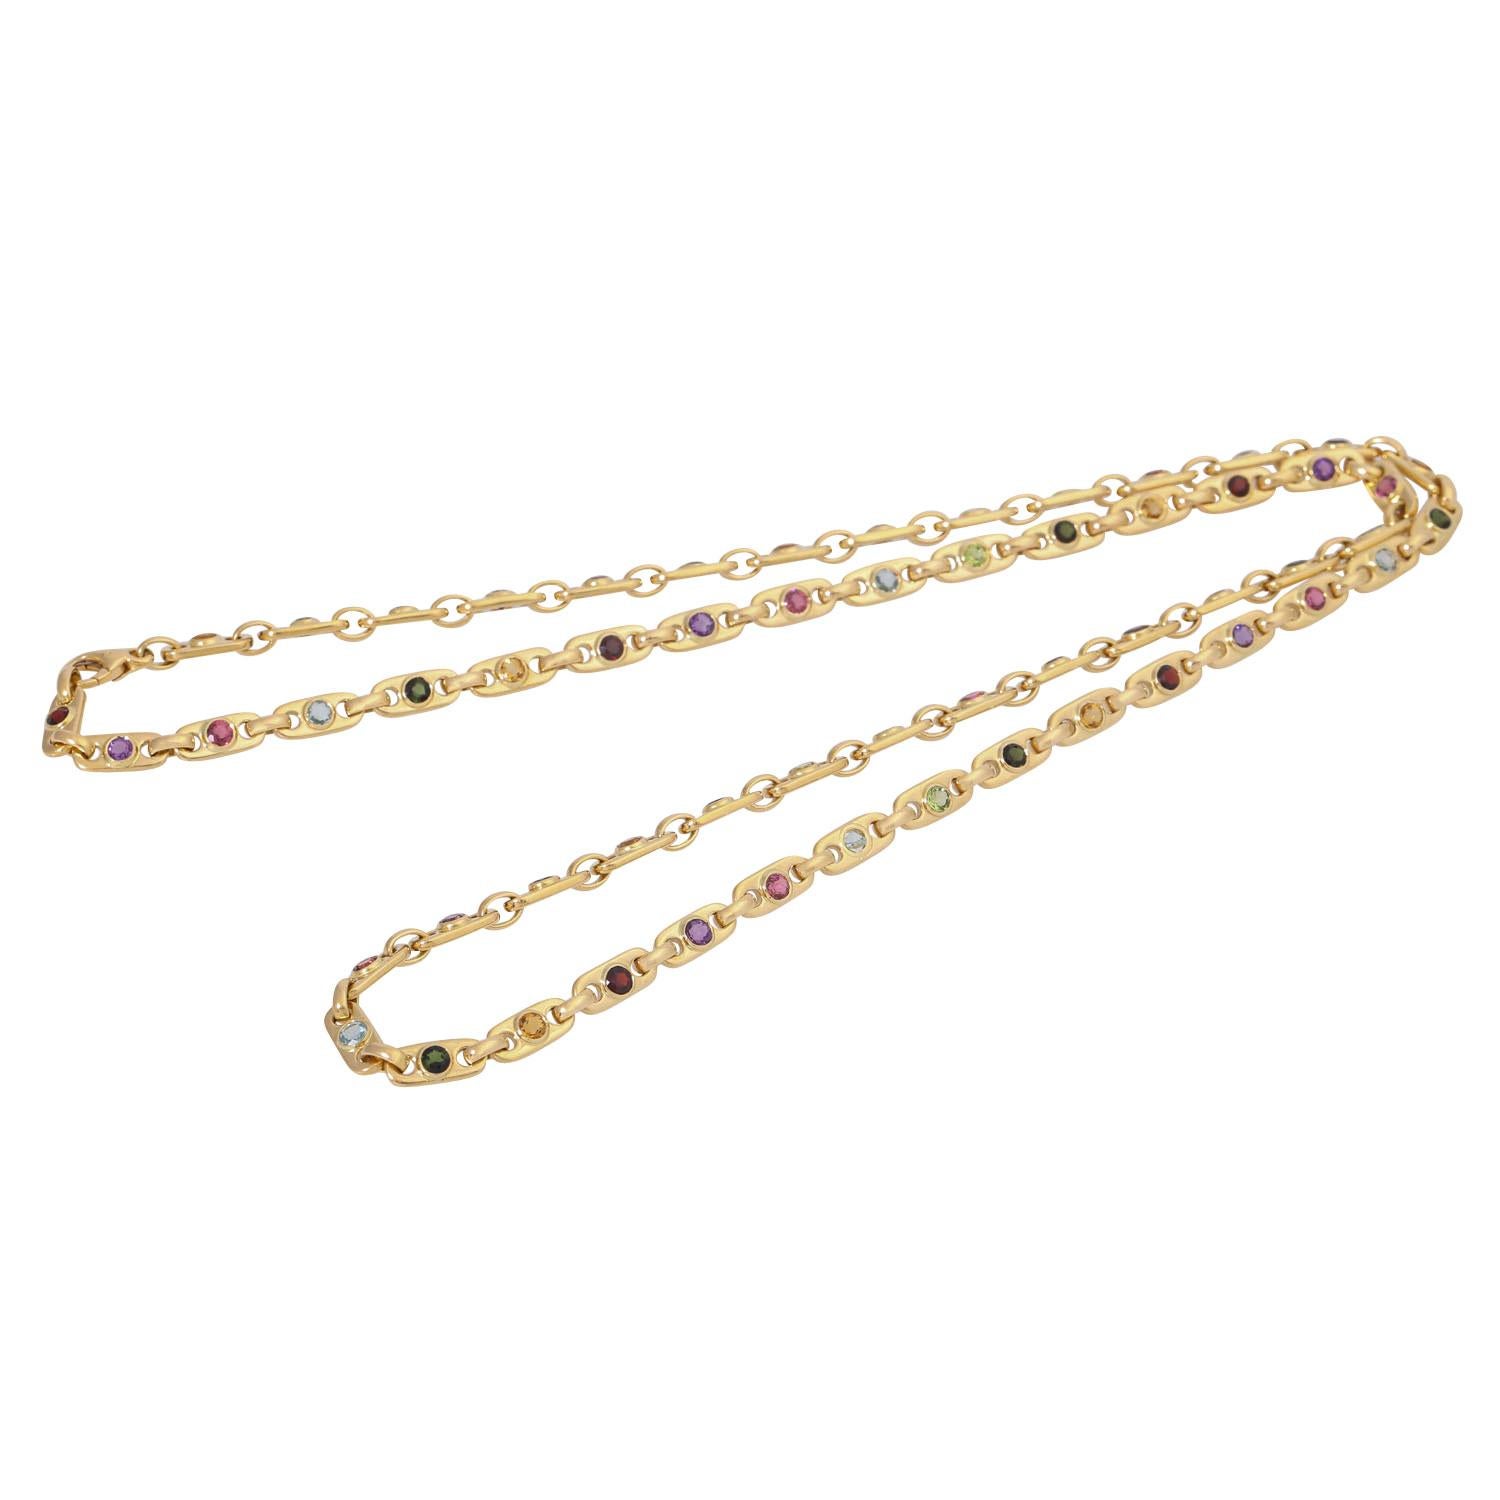 Brilliant Cut Tännler Chain with Numerous Small Gemstones For Sale